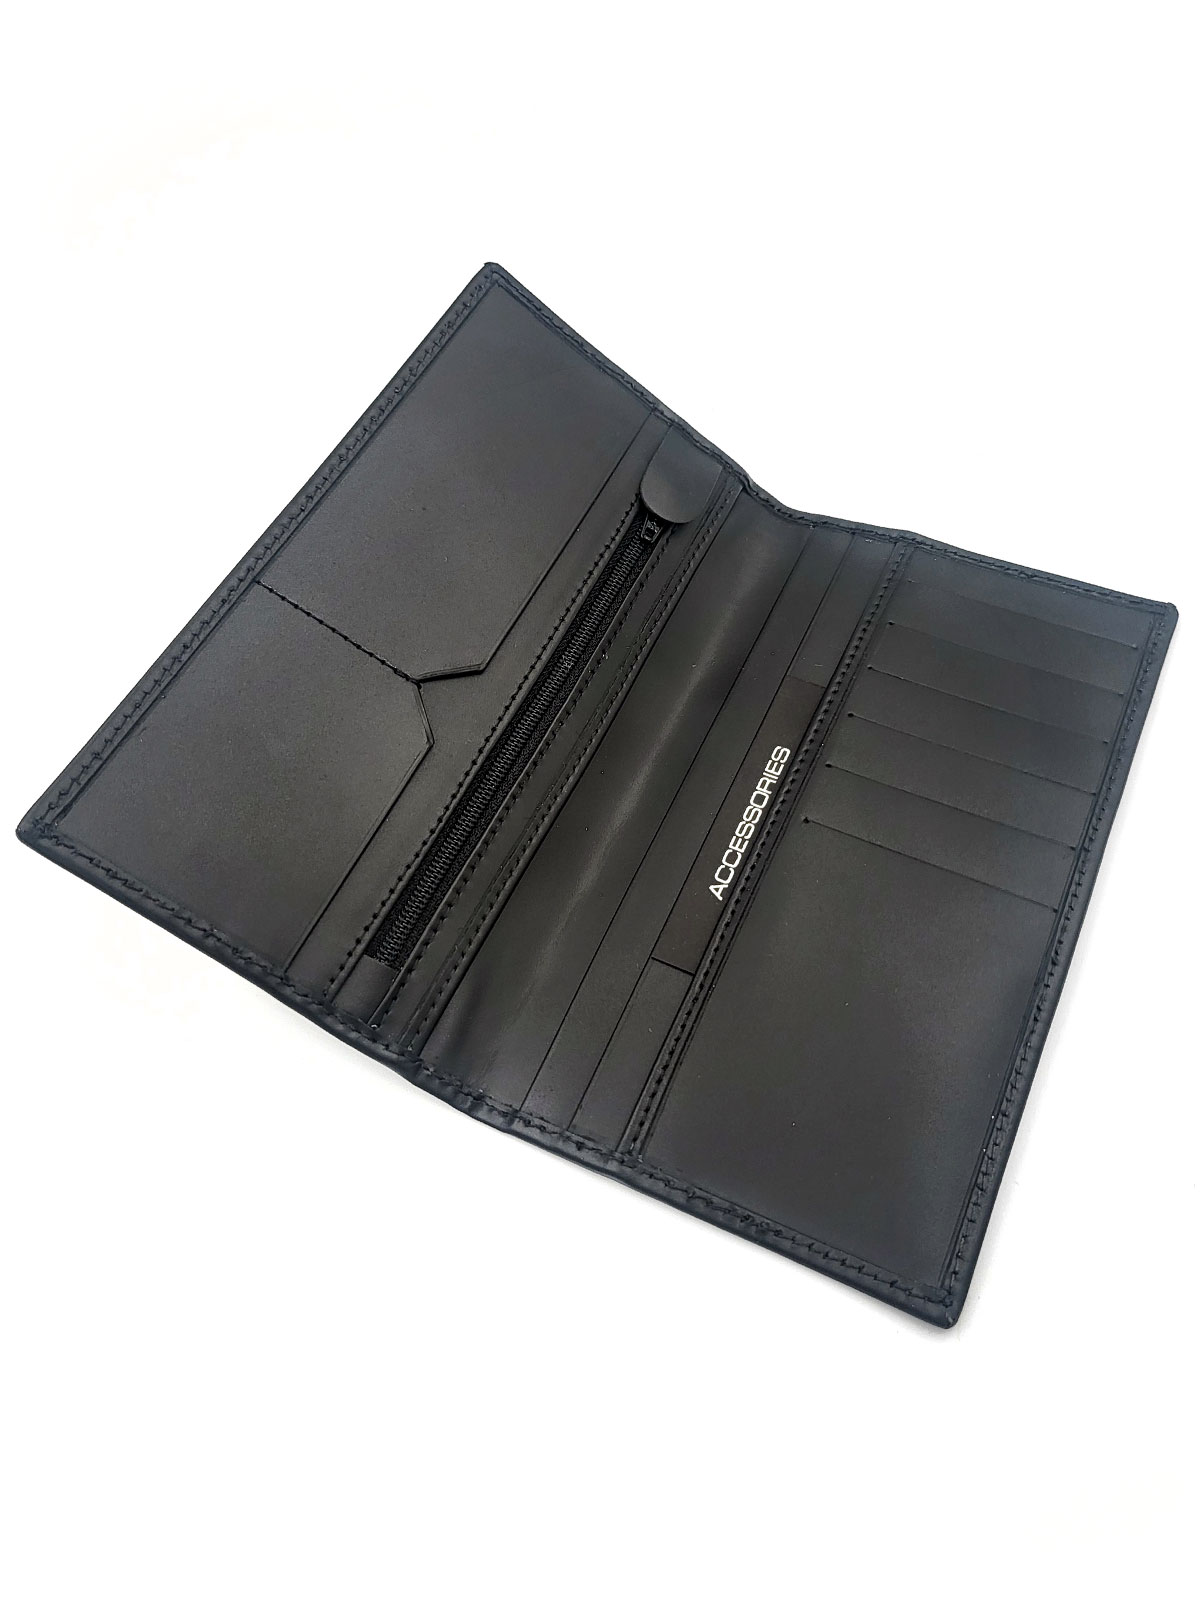 Mens wallet with two compartments - 10852 - € 38.81 img2